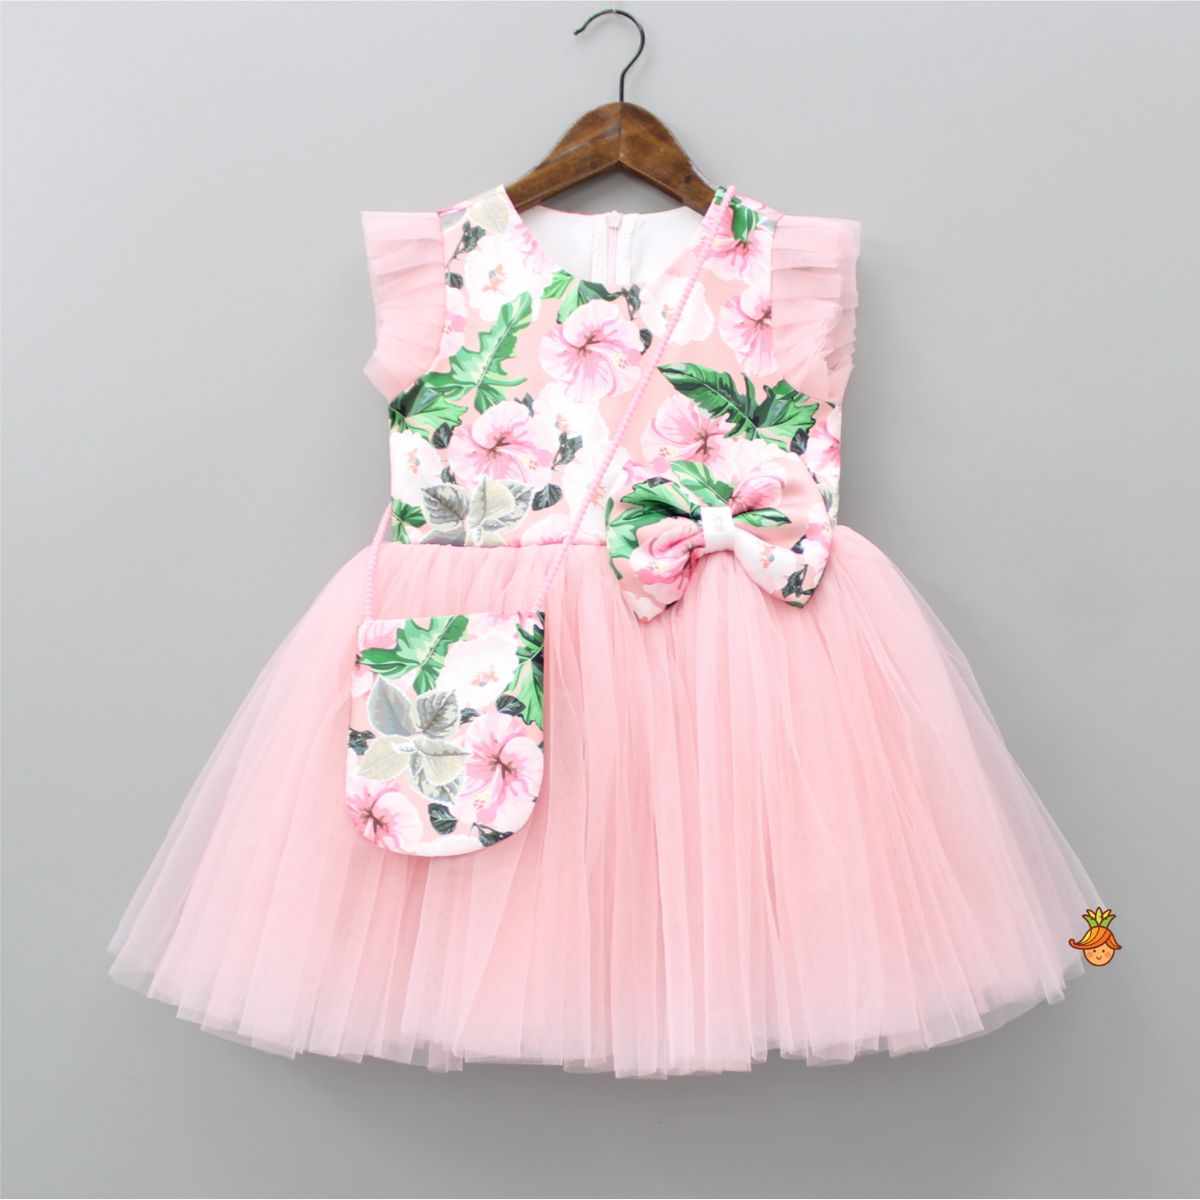 Exquisite Floral Printed Frilly Dress